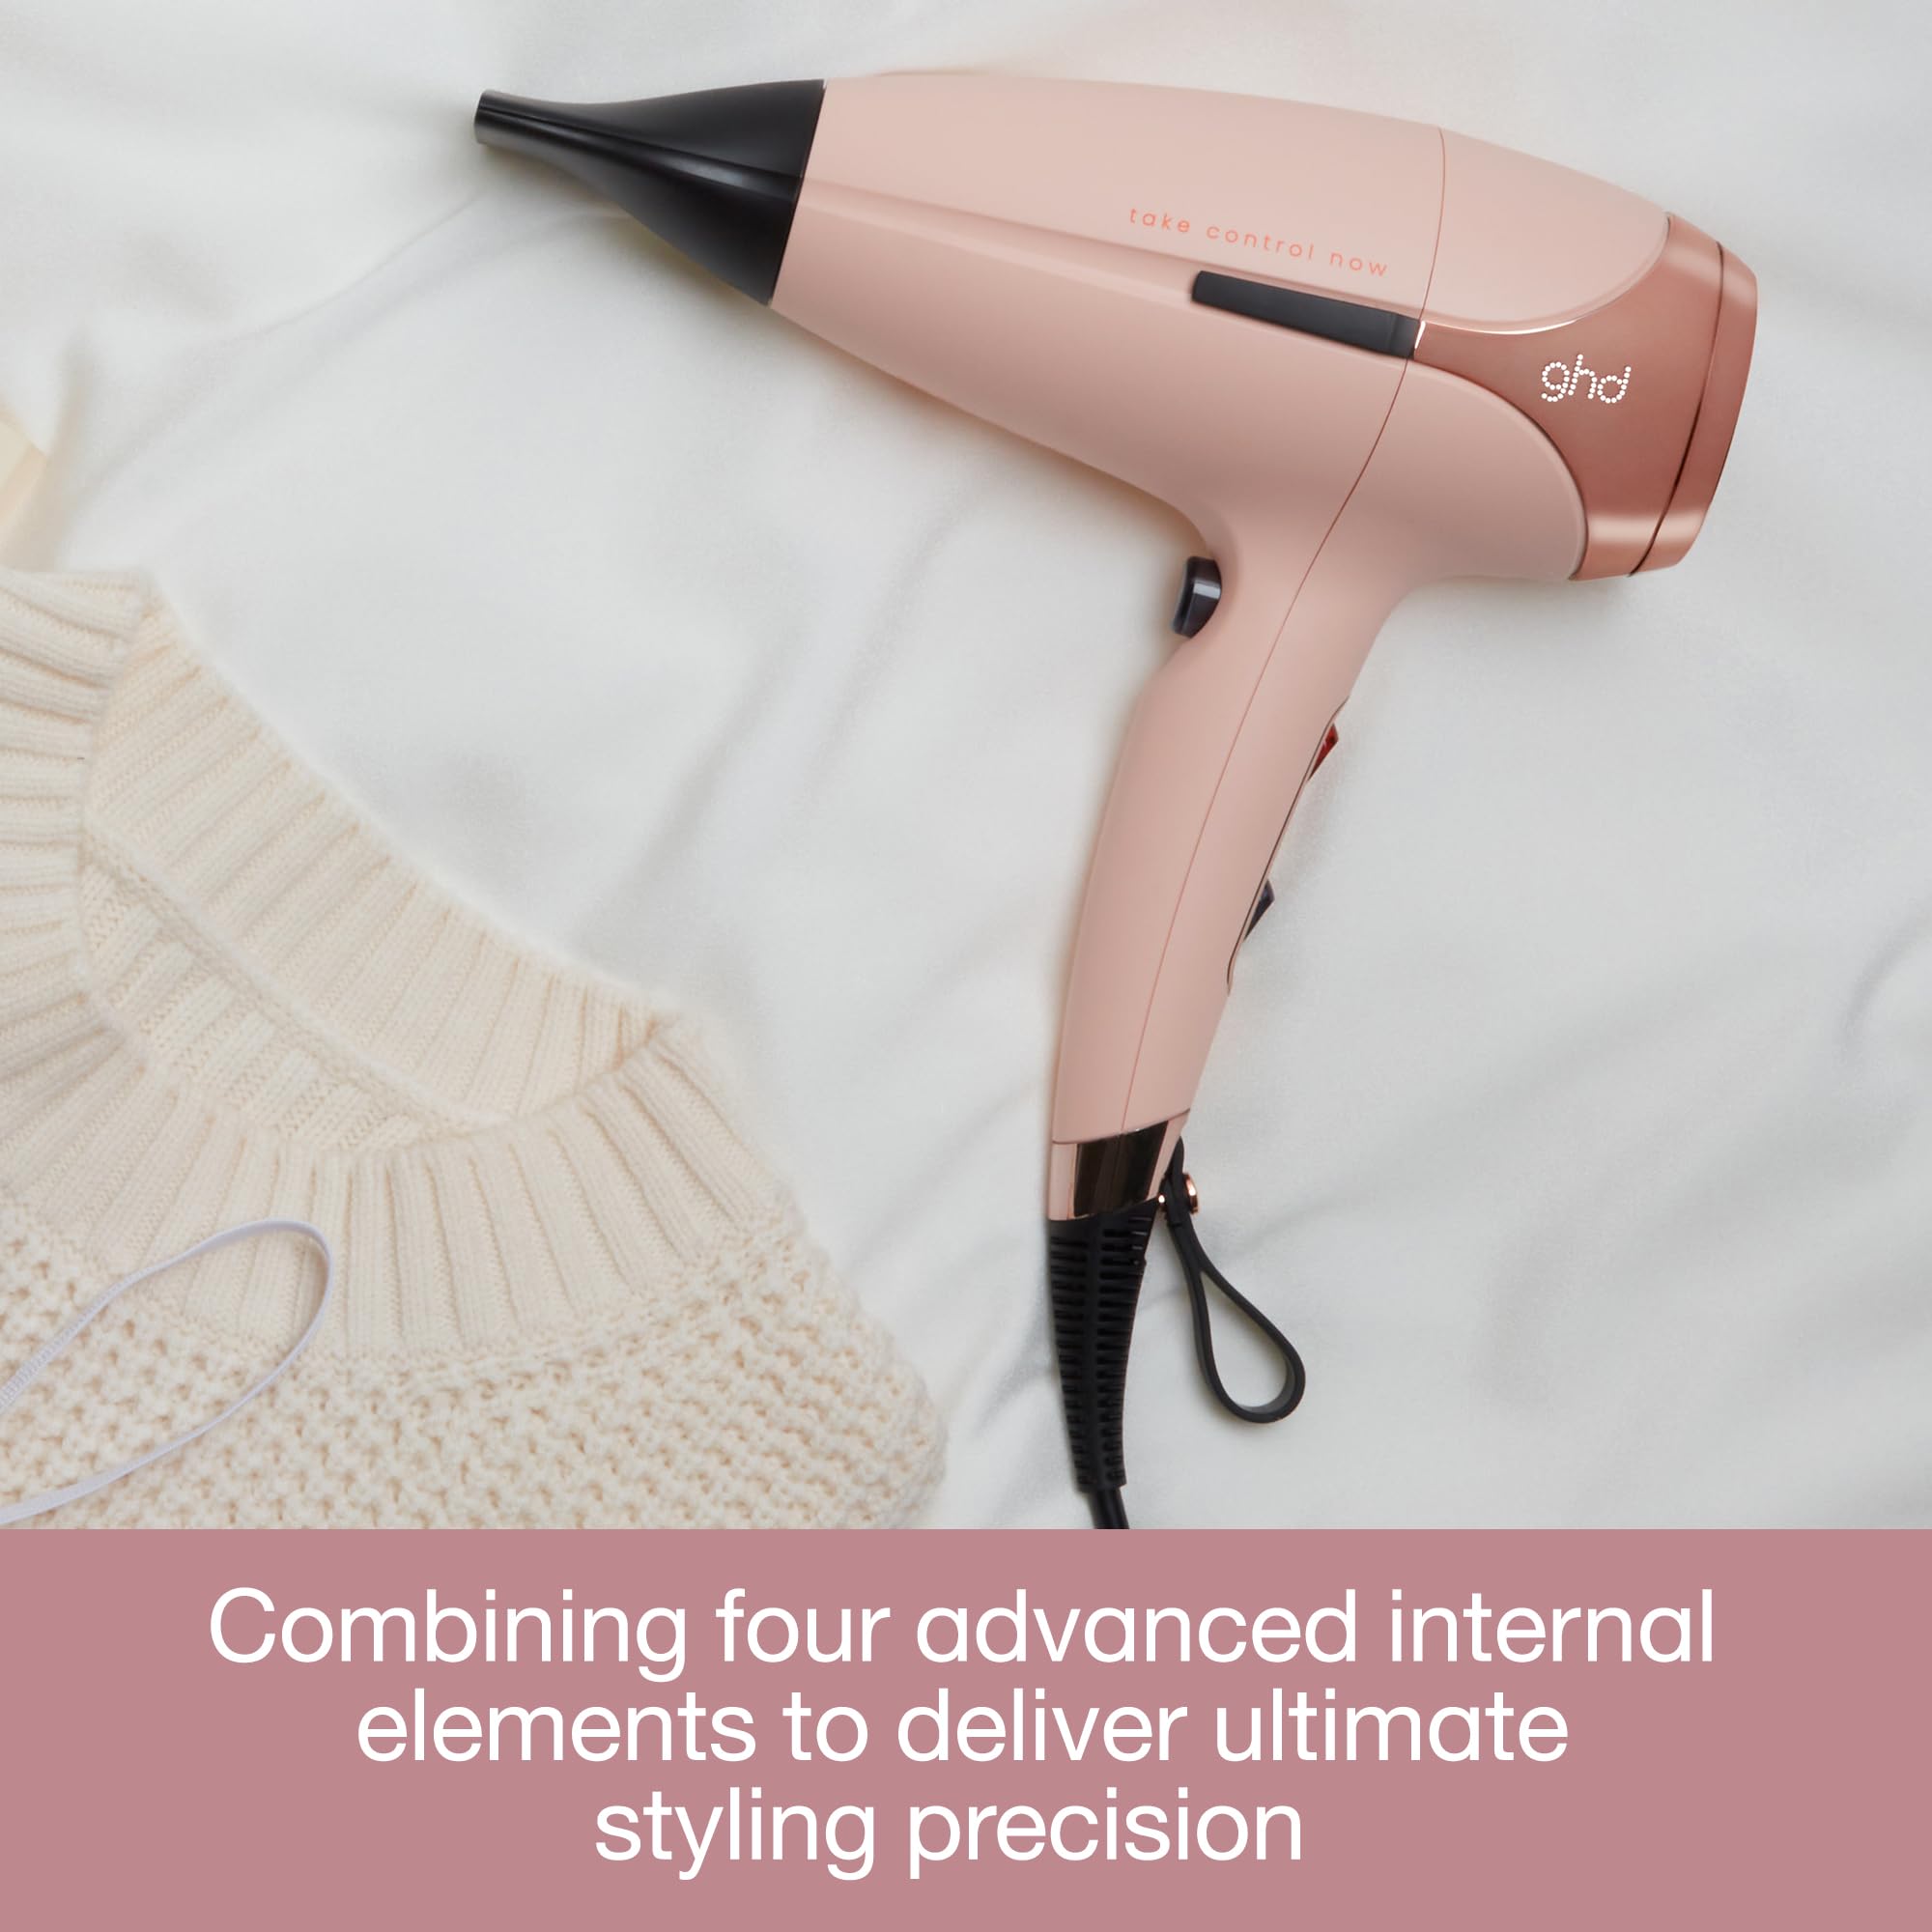 ghd Helios Hair Dryer ― 1875w Professional Blow Dryer, Longer Life + Brushless Motor Lightweight Hair Dryer for Salon-Worthy Blowout ― Pink Peach, Charity Collection